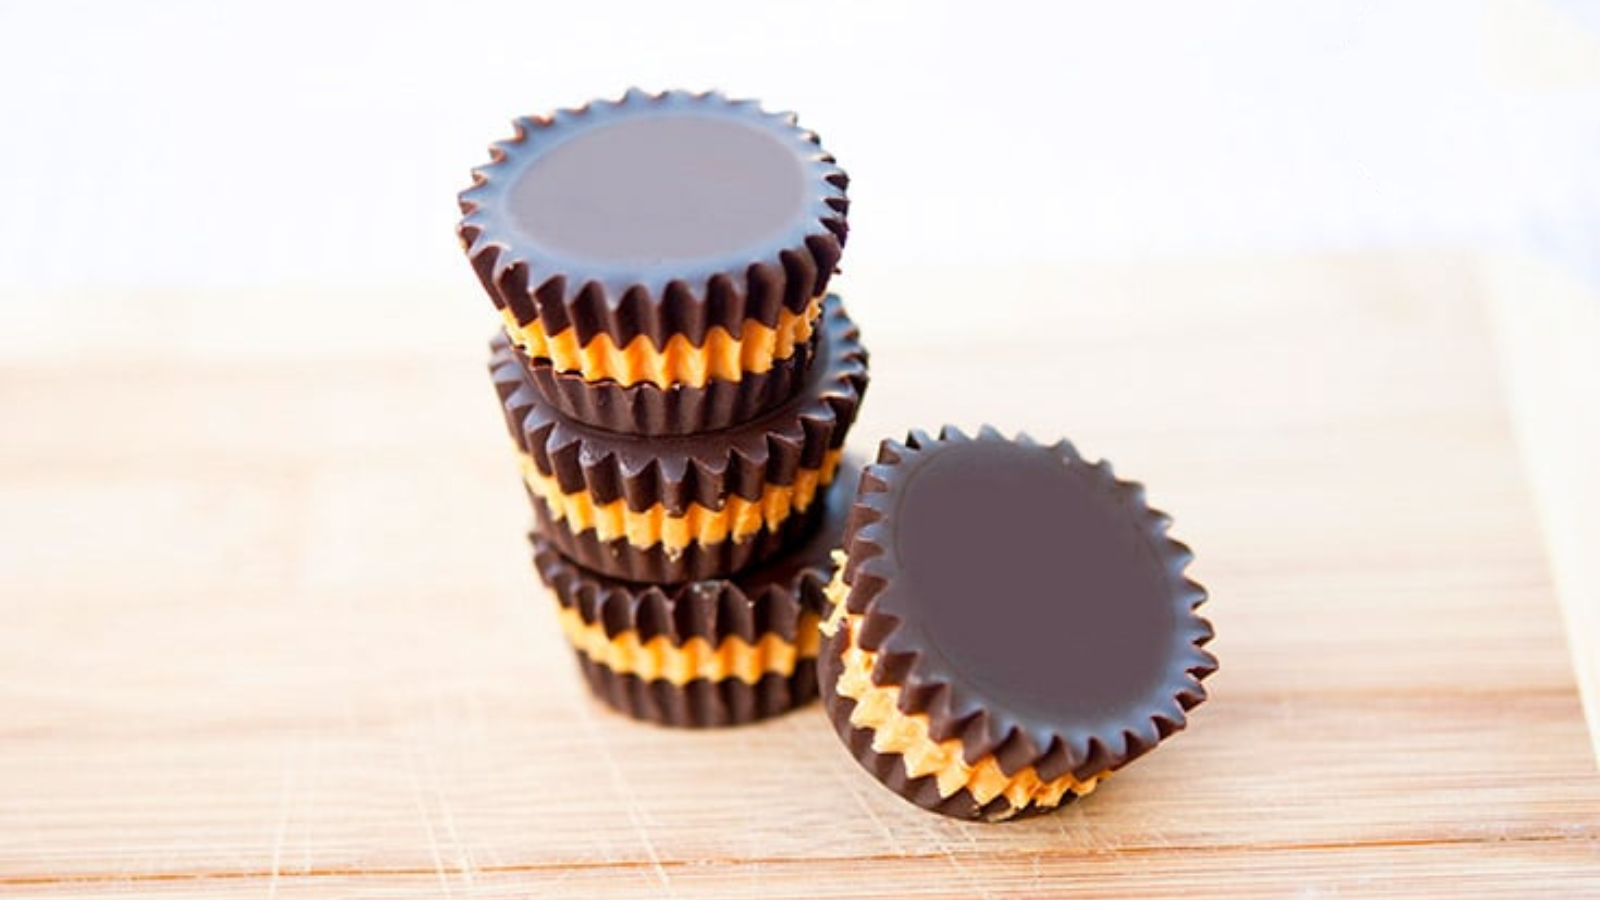 Three stacked peanut butter cups with a forth resting on the side, all sit on a wood surface.